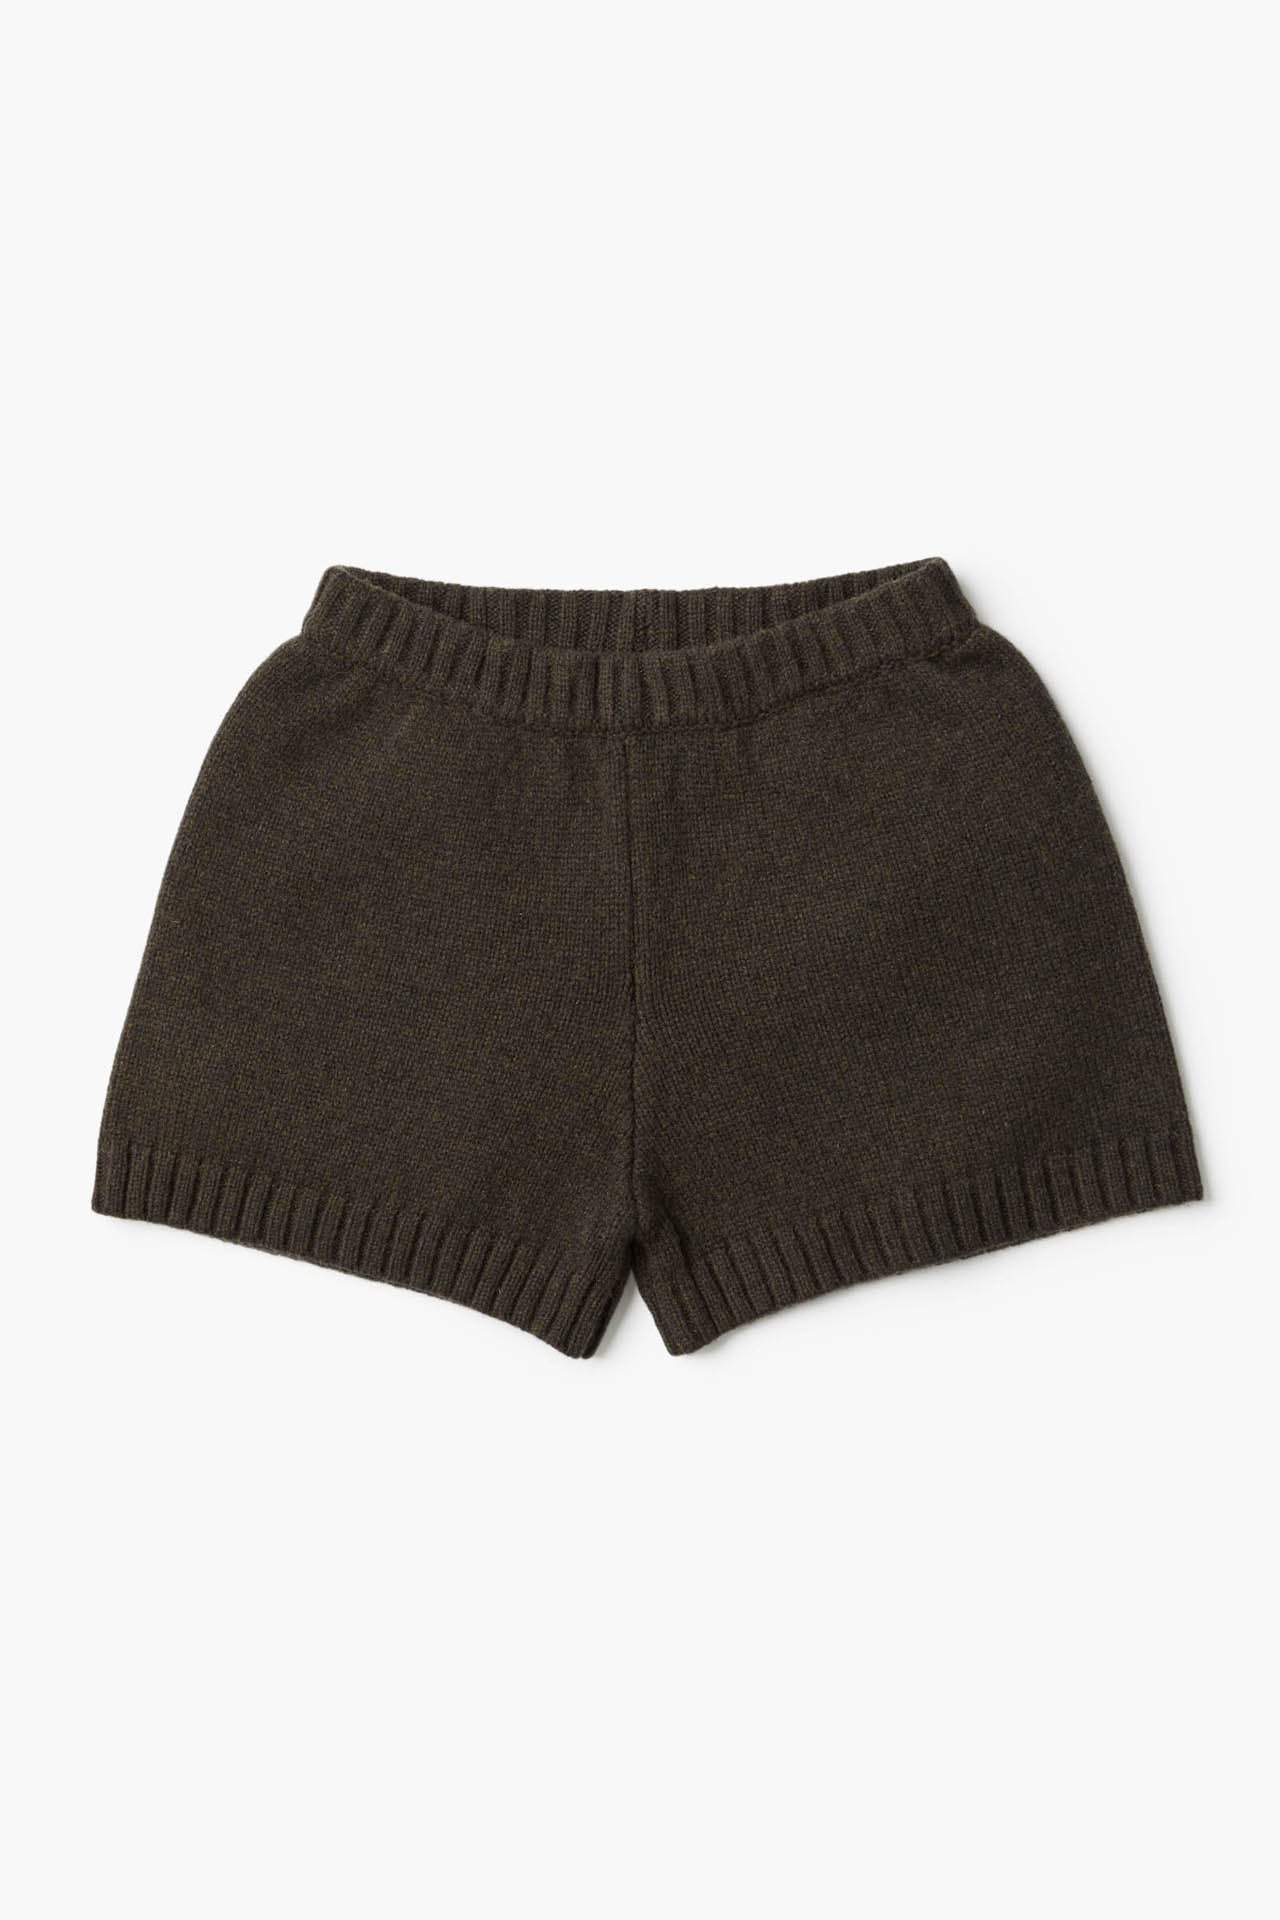 Fitted Knit shorts